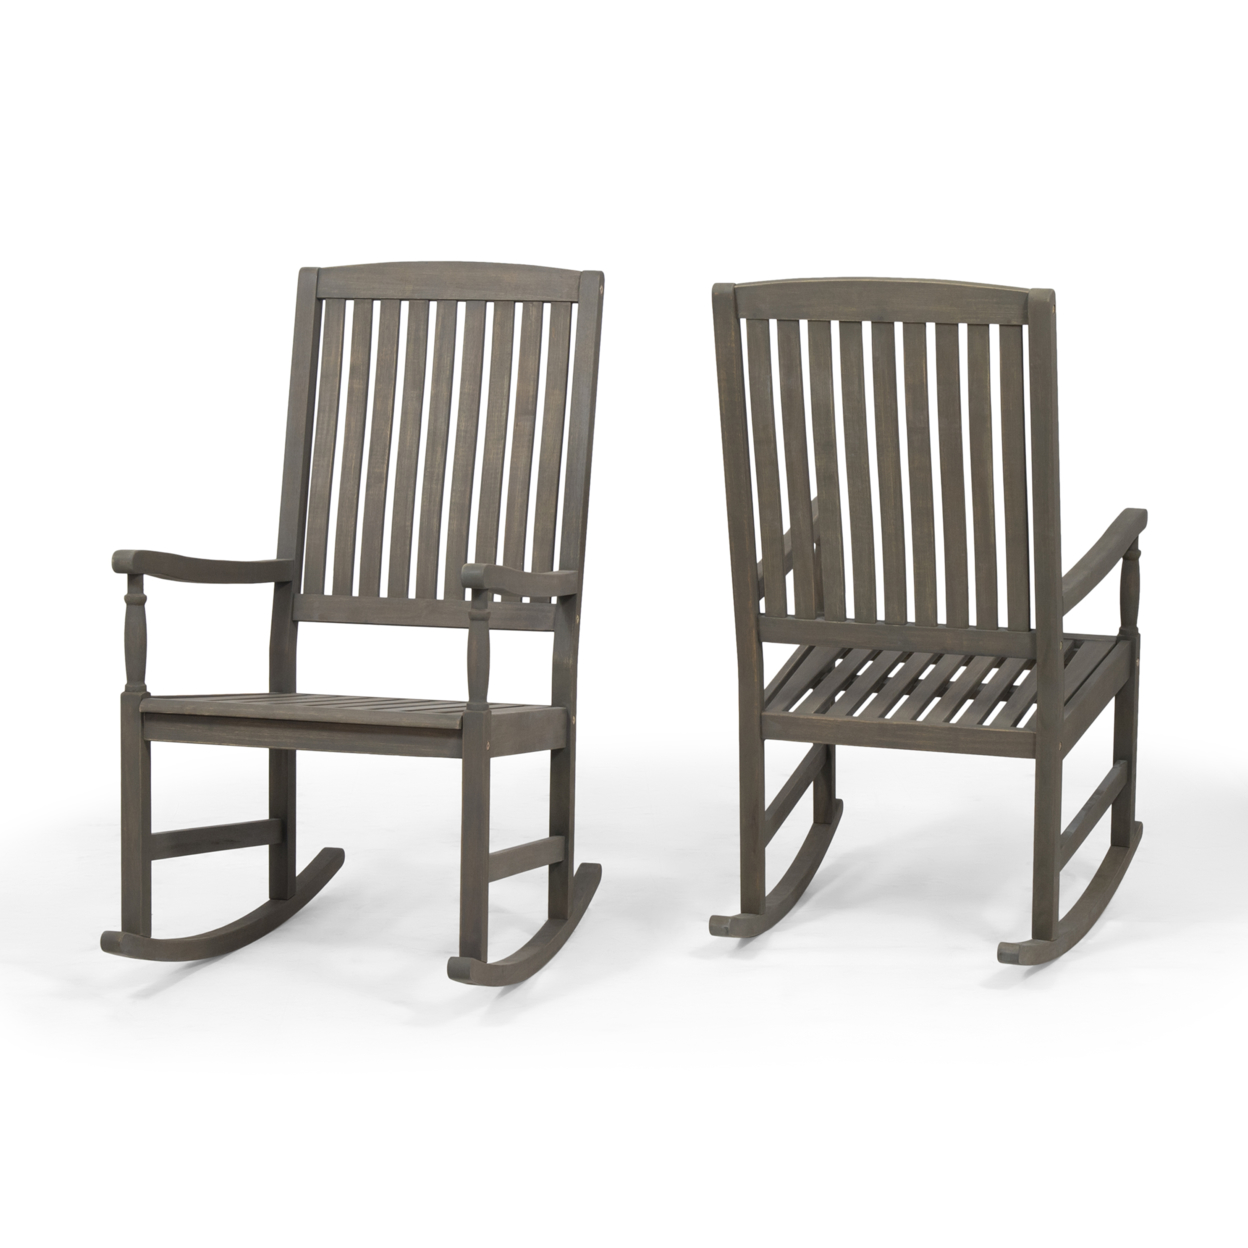 Penny Outdoor Acacia Wood Rocking Chairs (Set Of 2) - Gray Finish